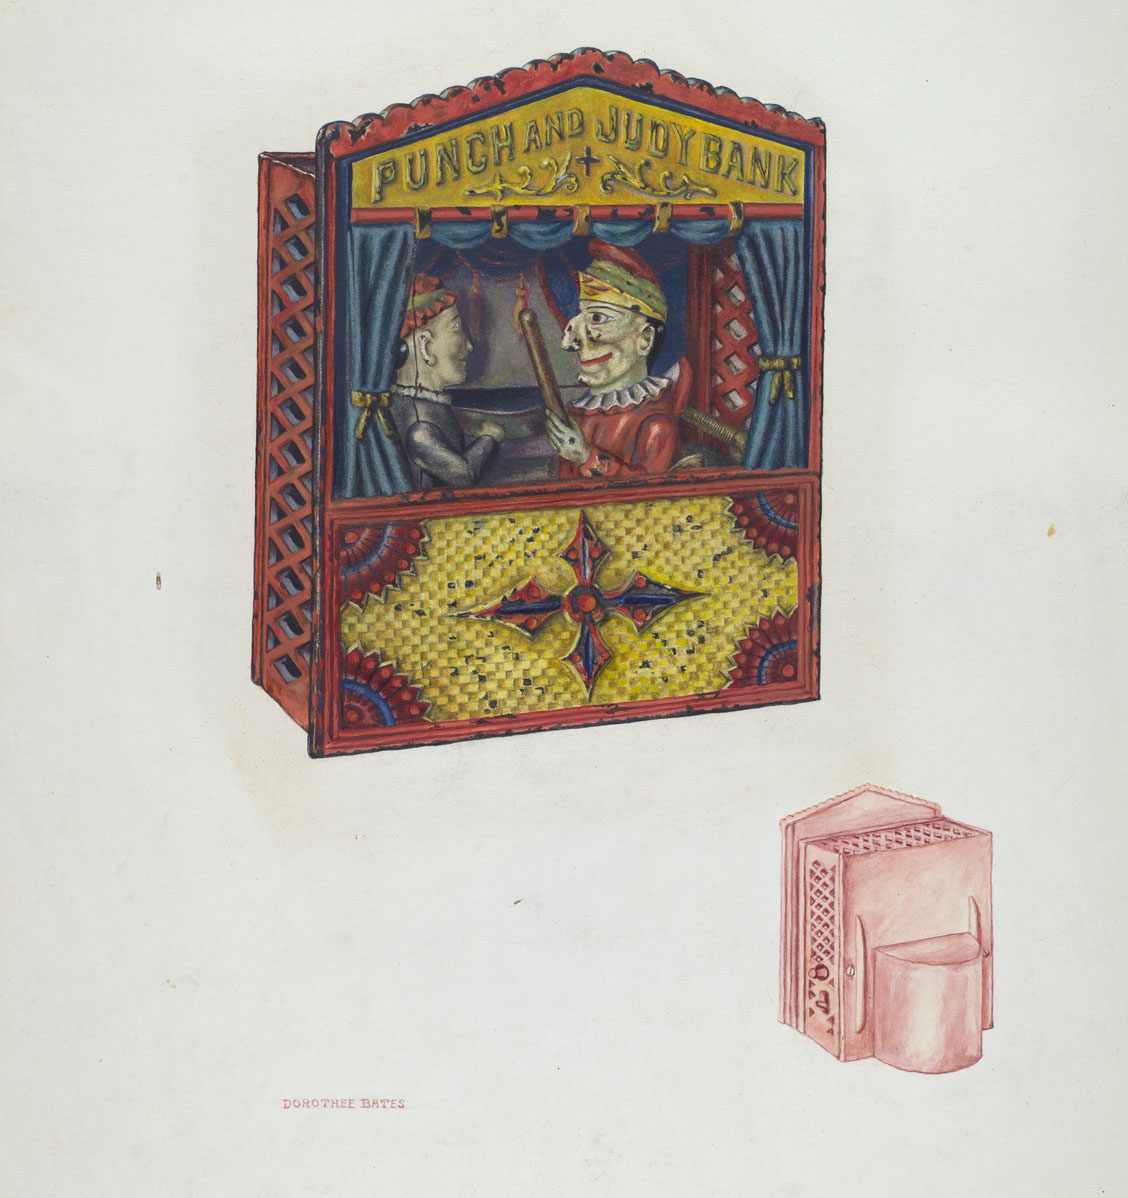 Dorothea Bates, Mechanical Bank: Punch and Judy, American, active c. 1935, c. 1941, watercolor, gouache, pen and ink, and graphite on paper, Index of American Design